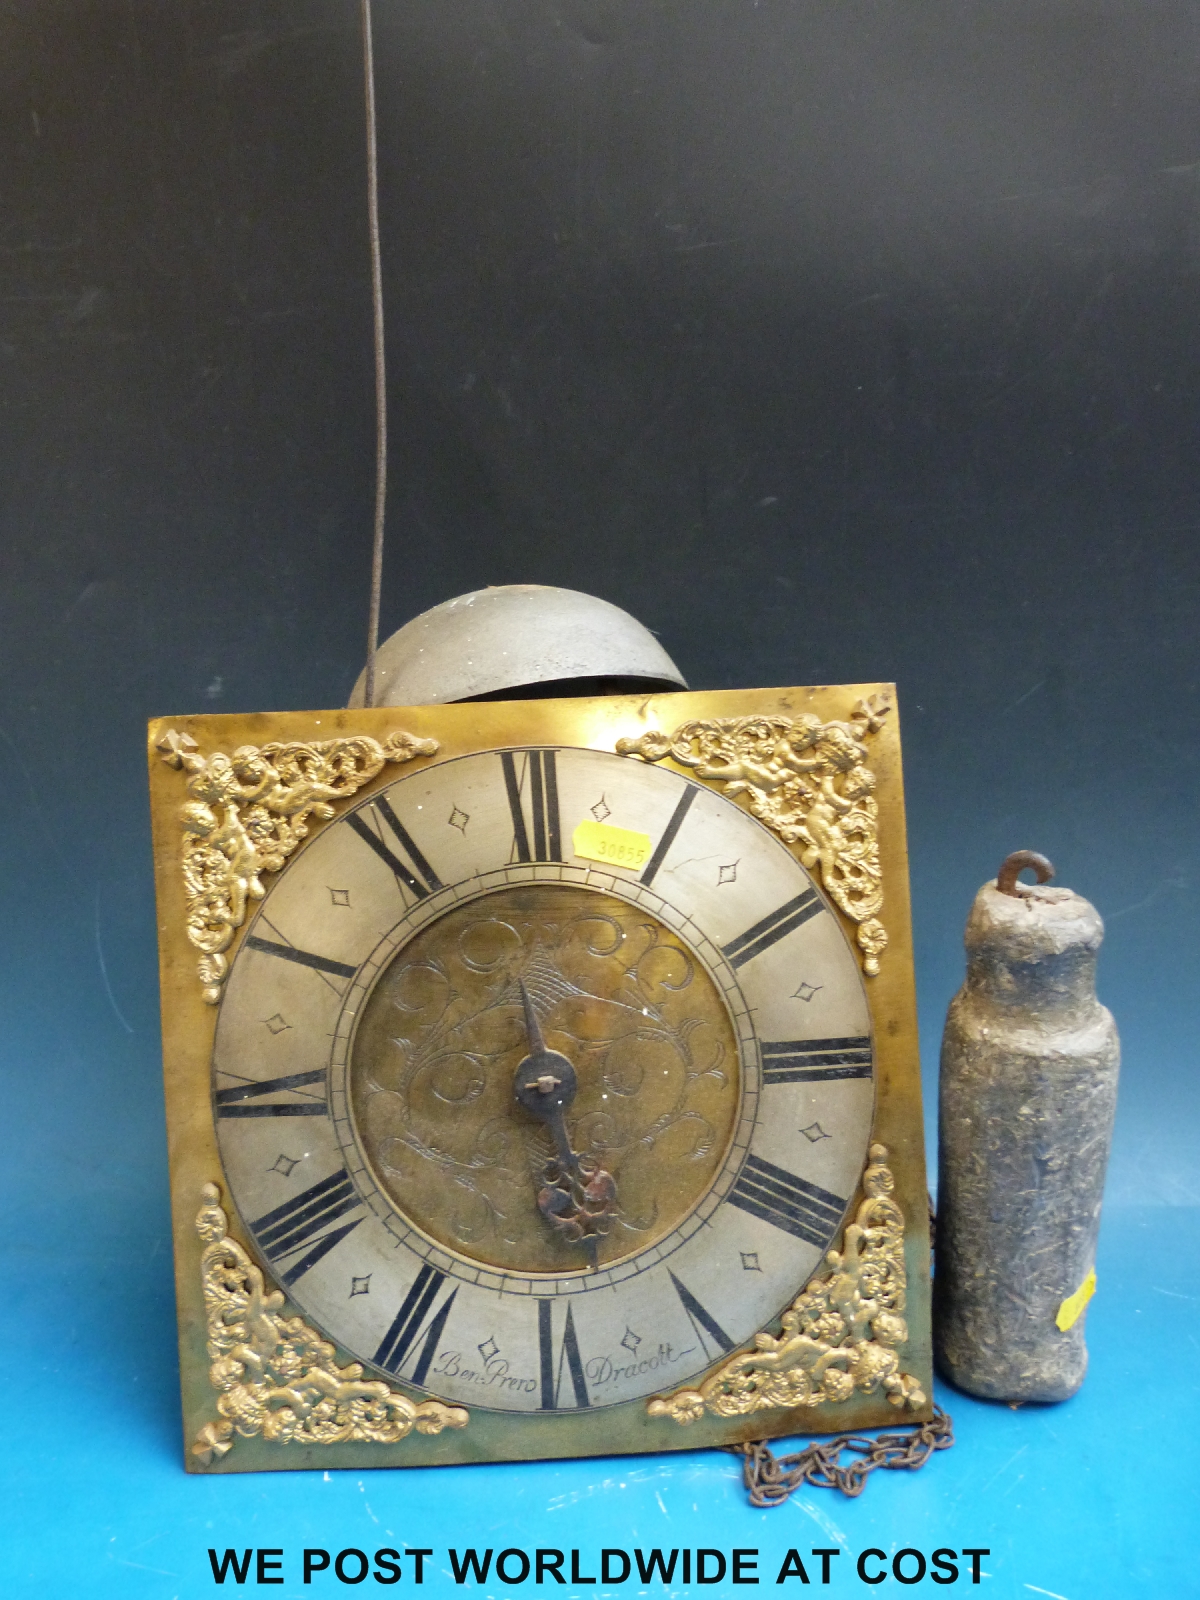 A c1720 long cased clock movement and dial, complete with original weight and pendulum.